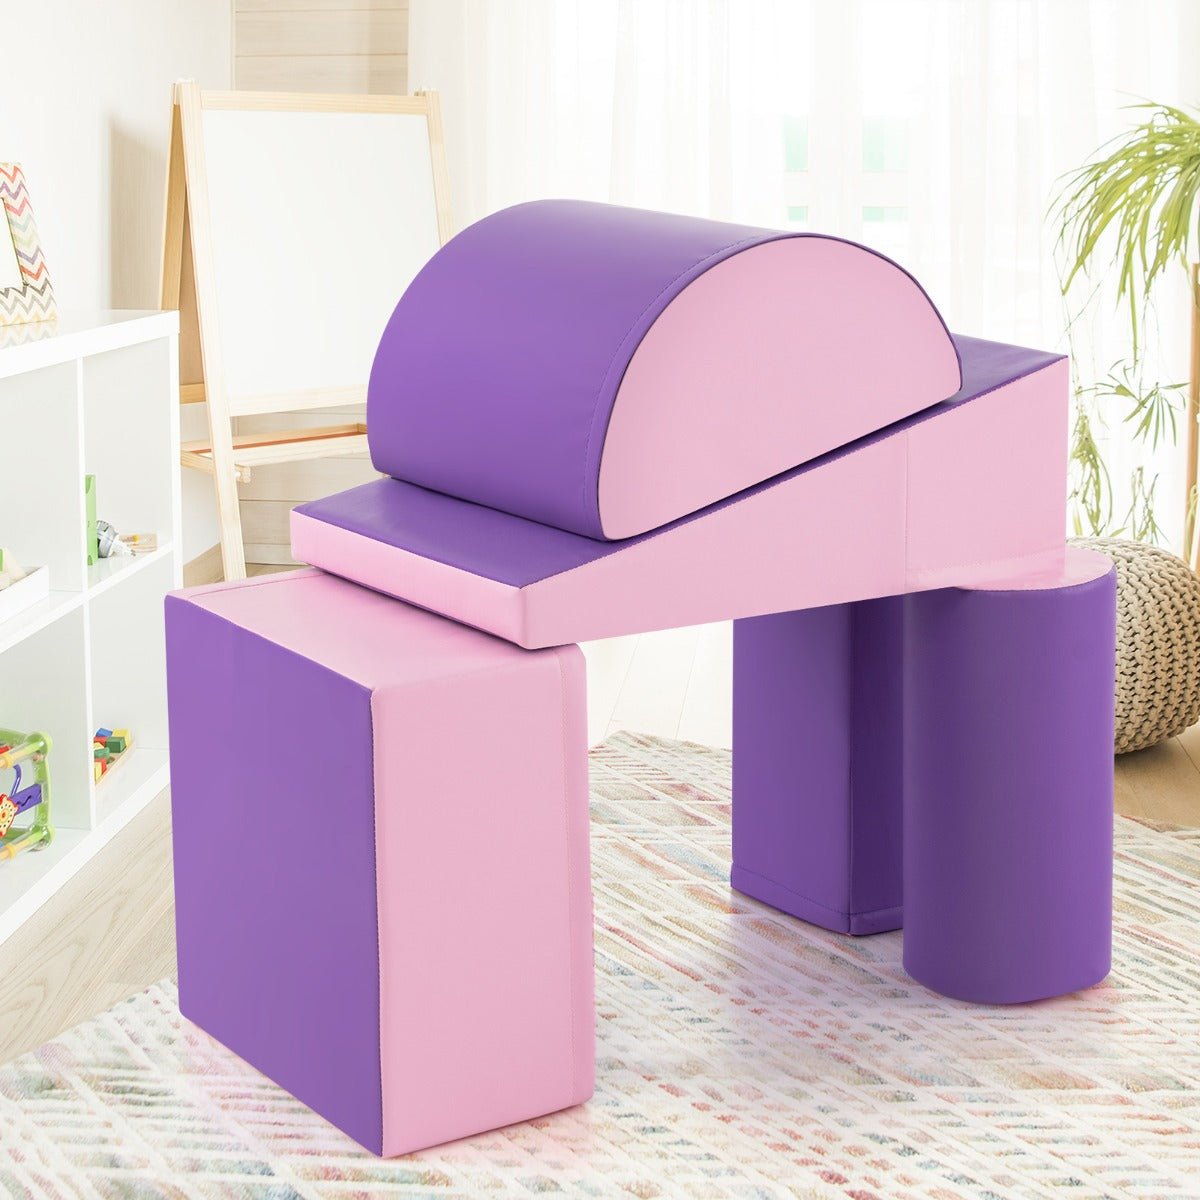 Imagination Soars with Our Pink Purple Playset